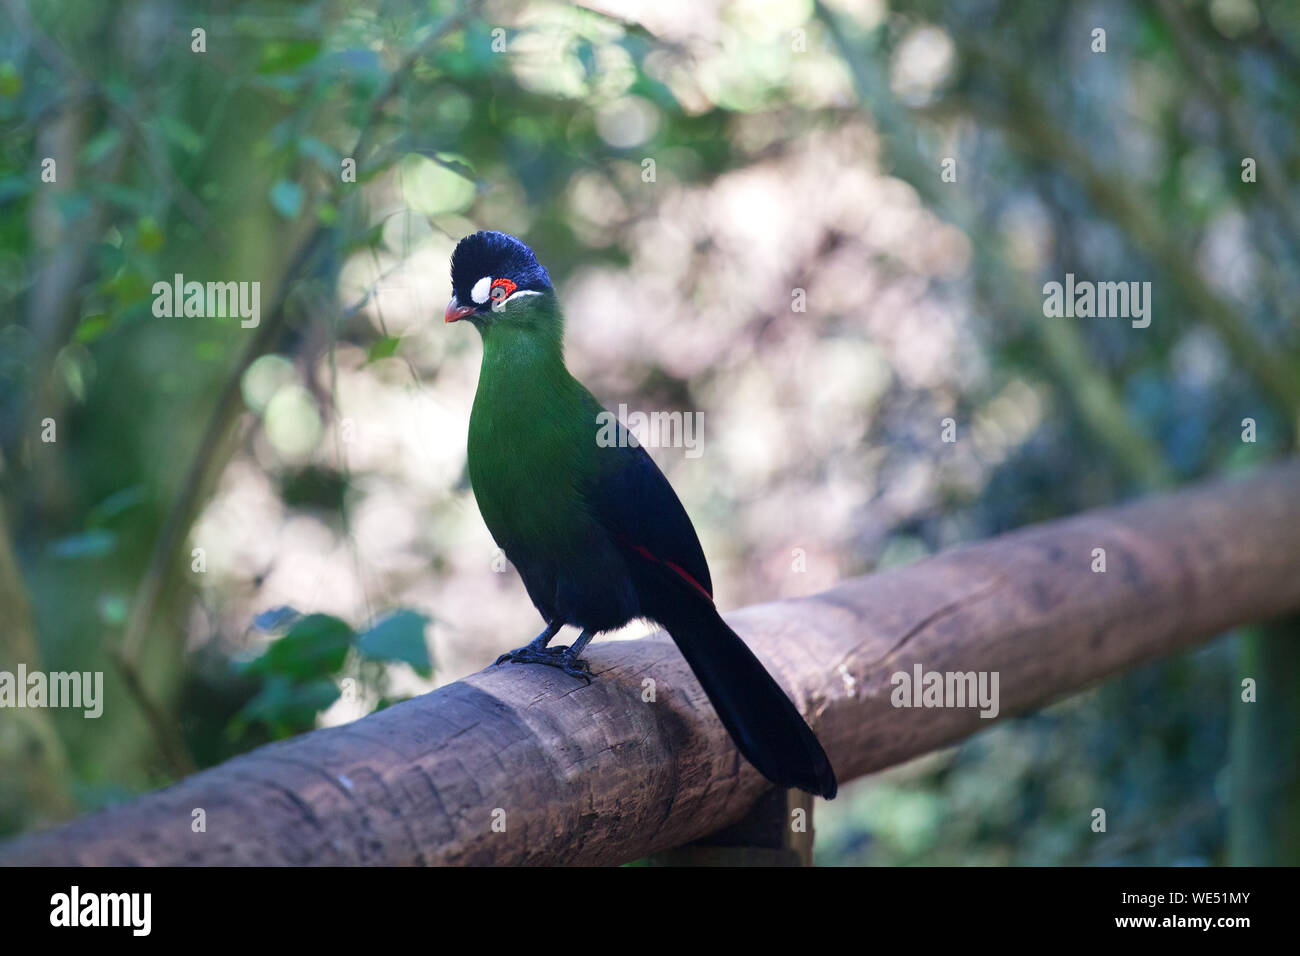 Hartlaub's turaco, Tauraco hartlaubi green and blue bird banana eaters sits on branch on blurred green tree forest background close up, South Africa Stock Photo